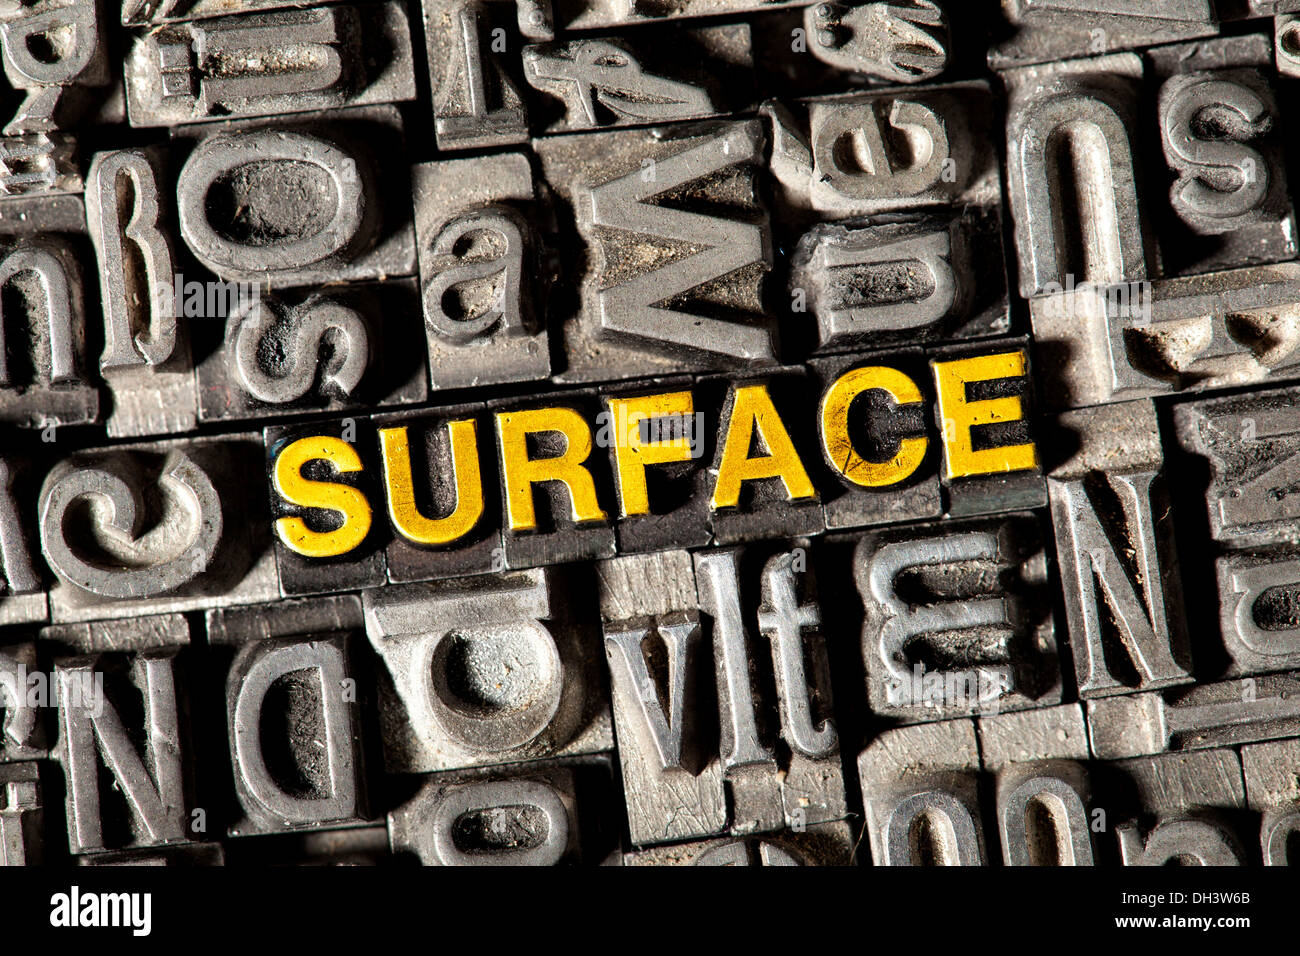 Old lead letters forming the word 'SURFACE' Stock Photo